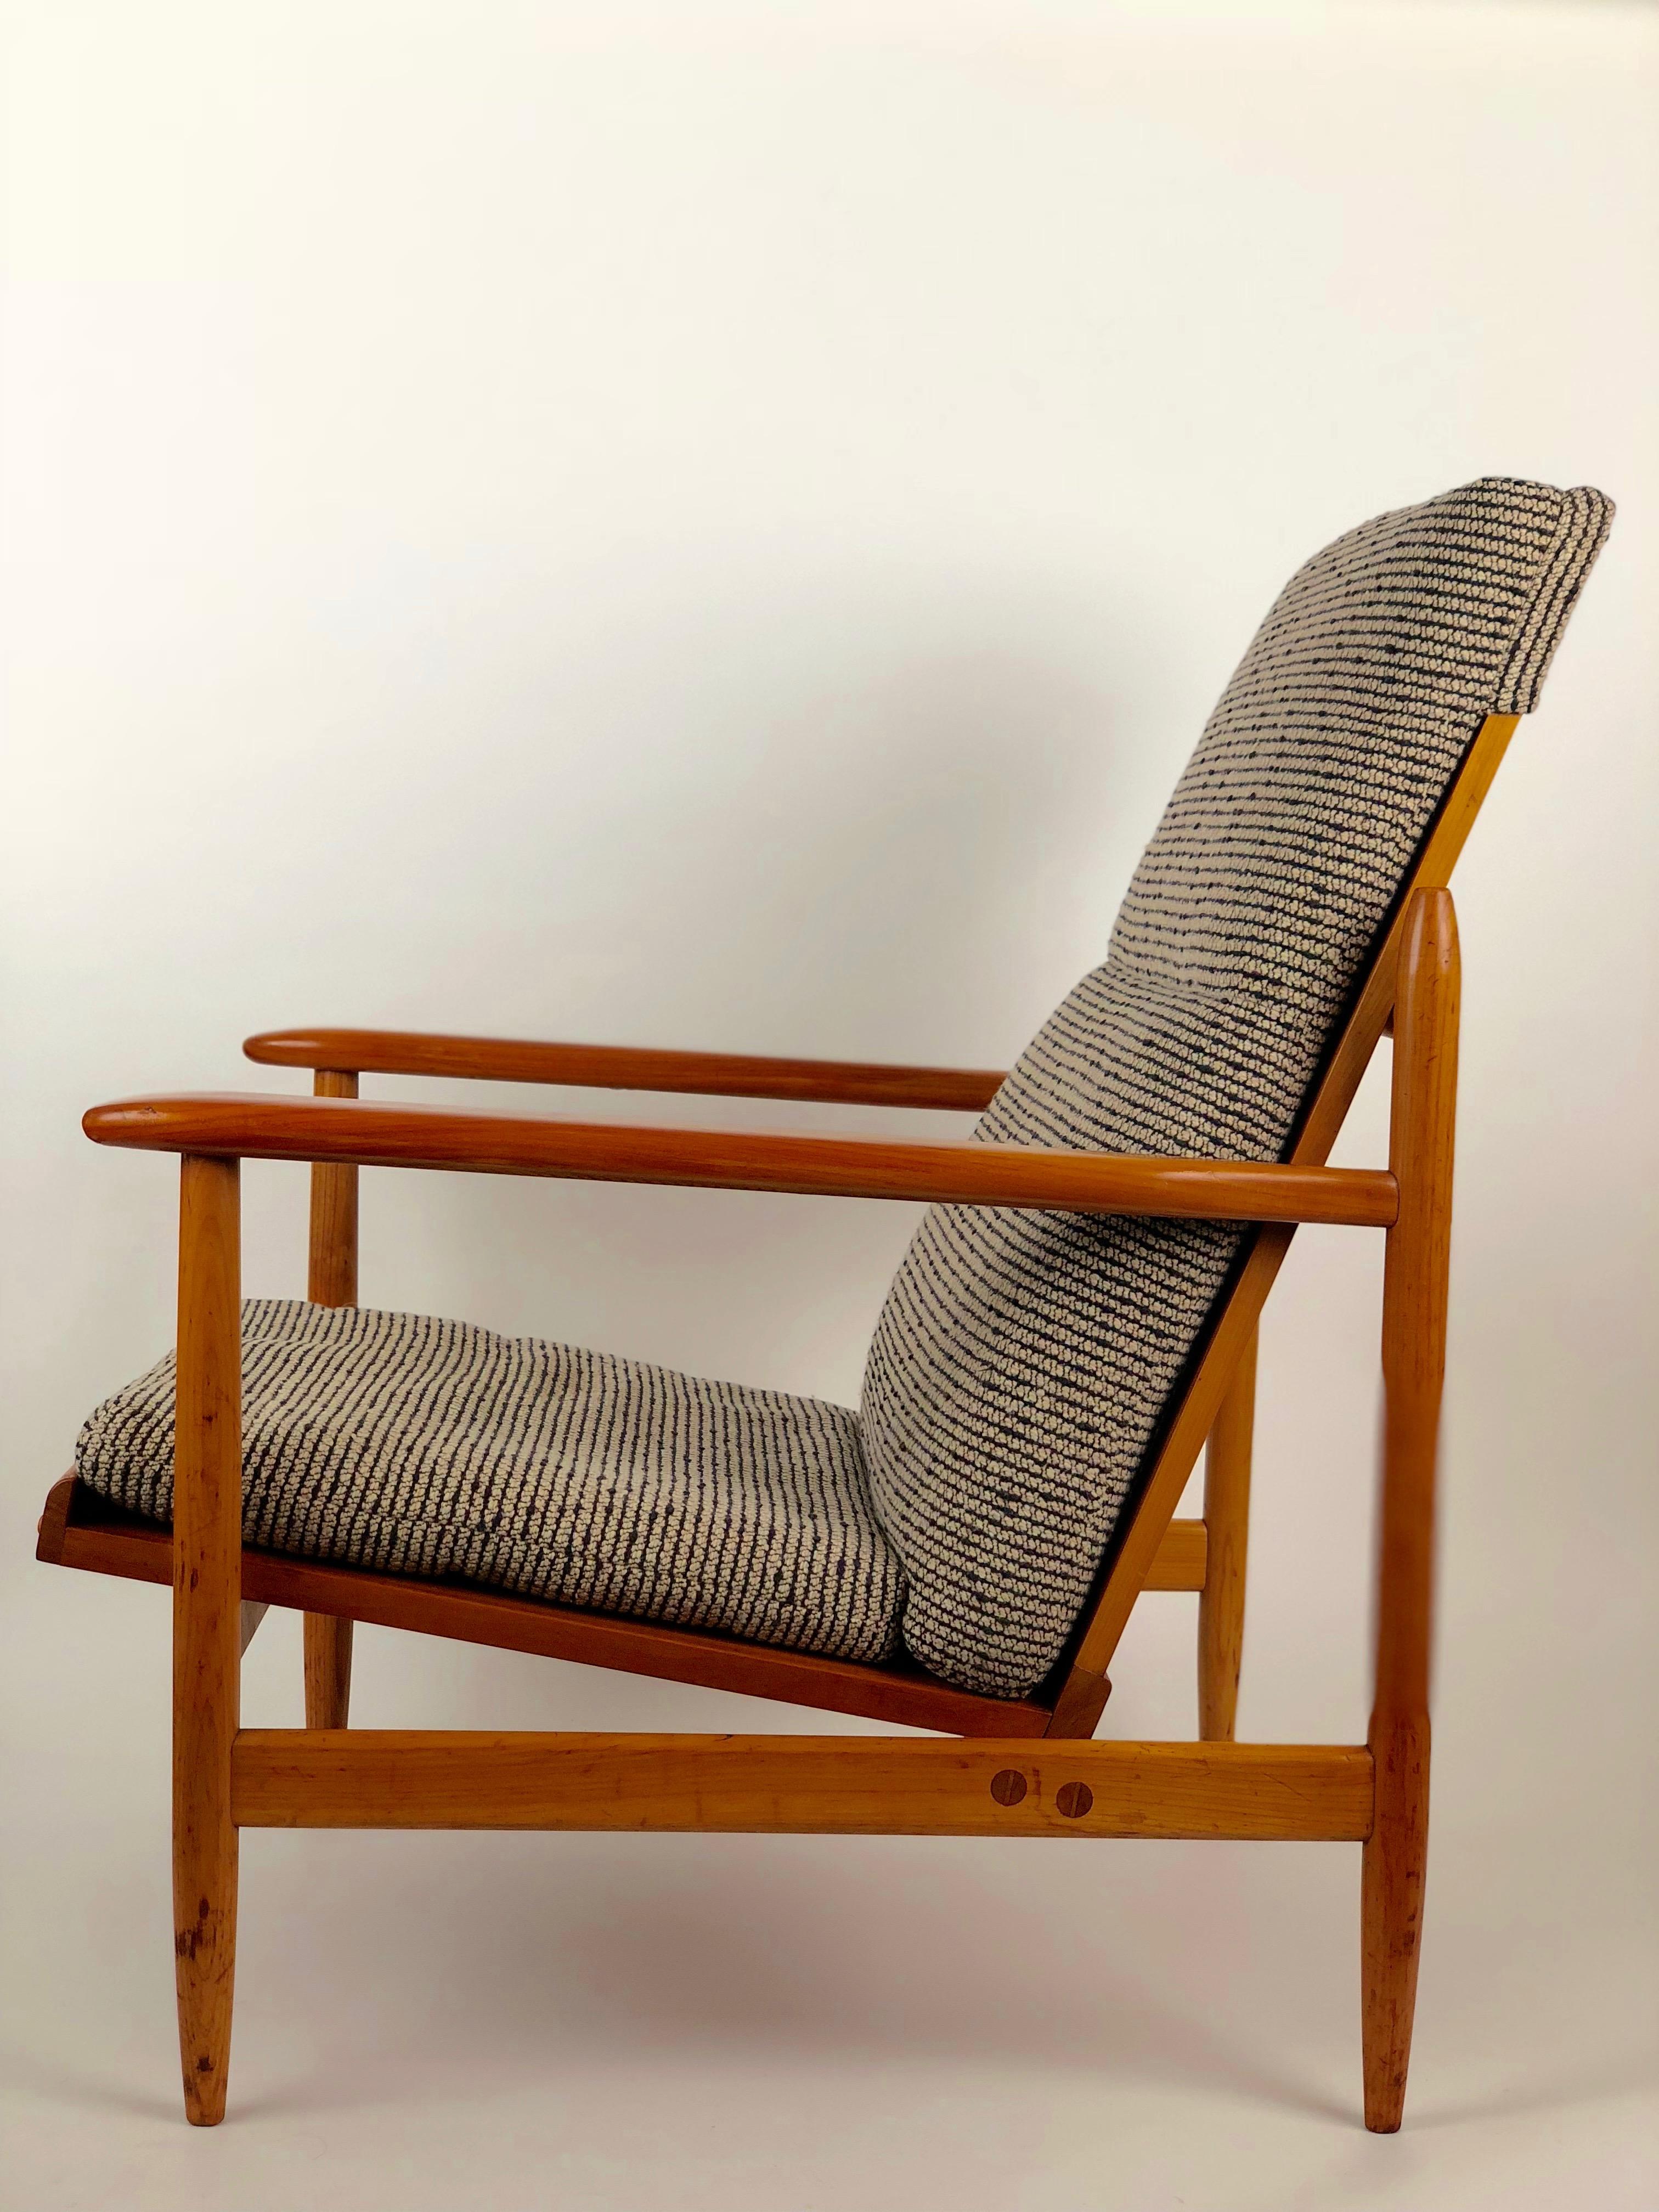 Mid-20th Century Elegant Armchair from Uluv in Cherry, 1960s, Czech Republic For Sale